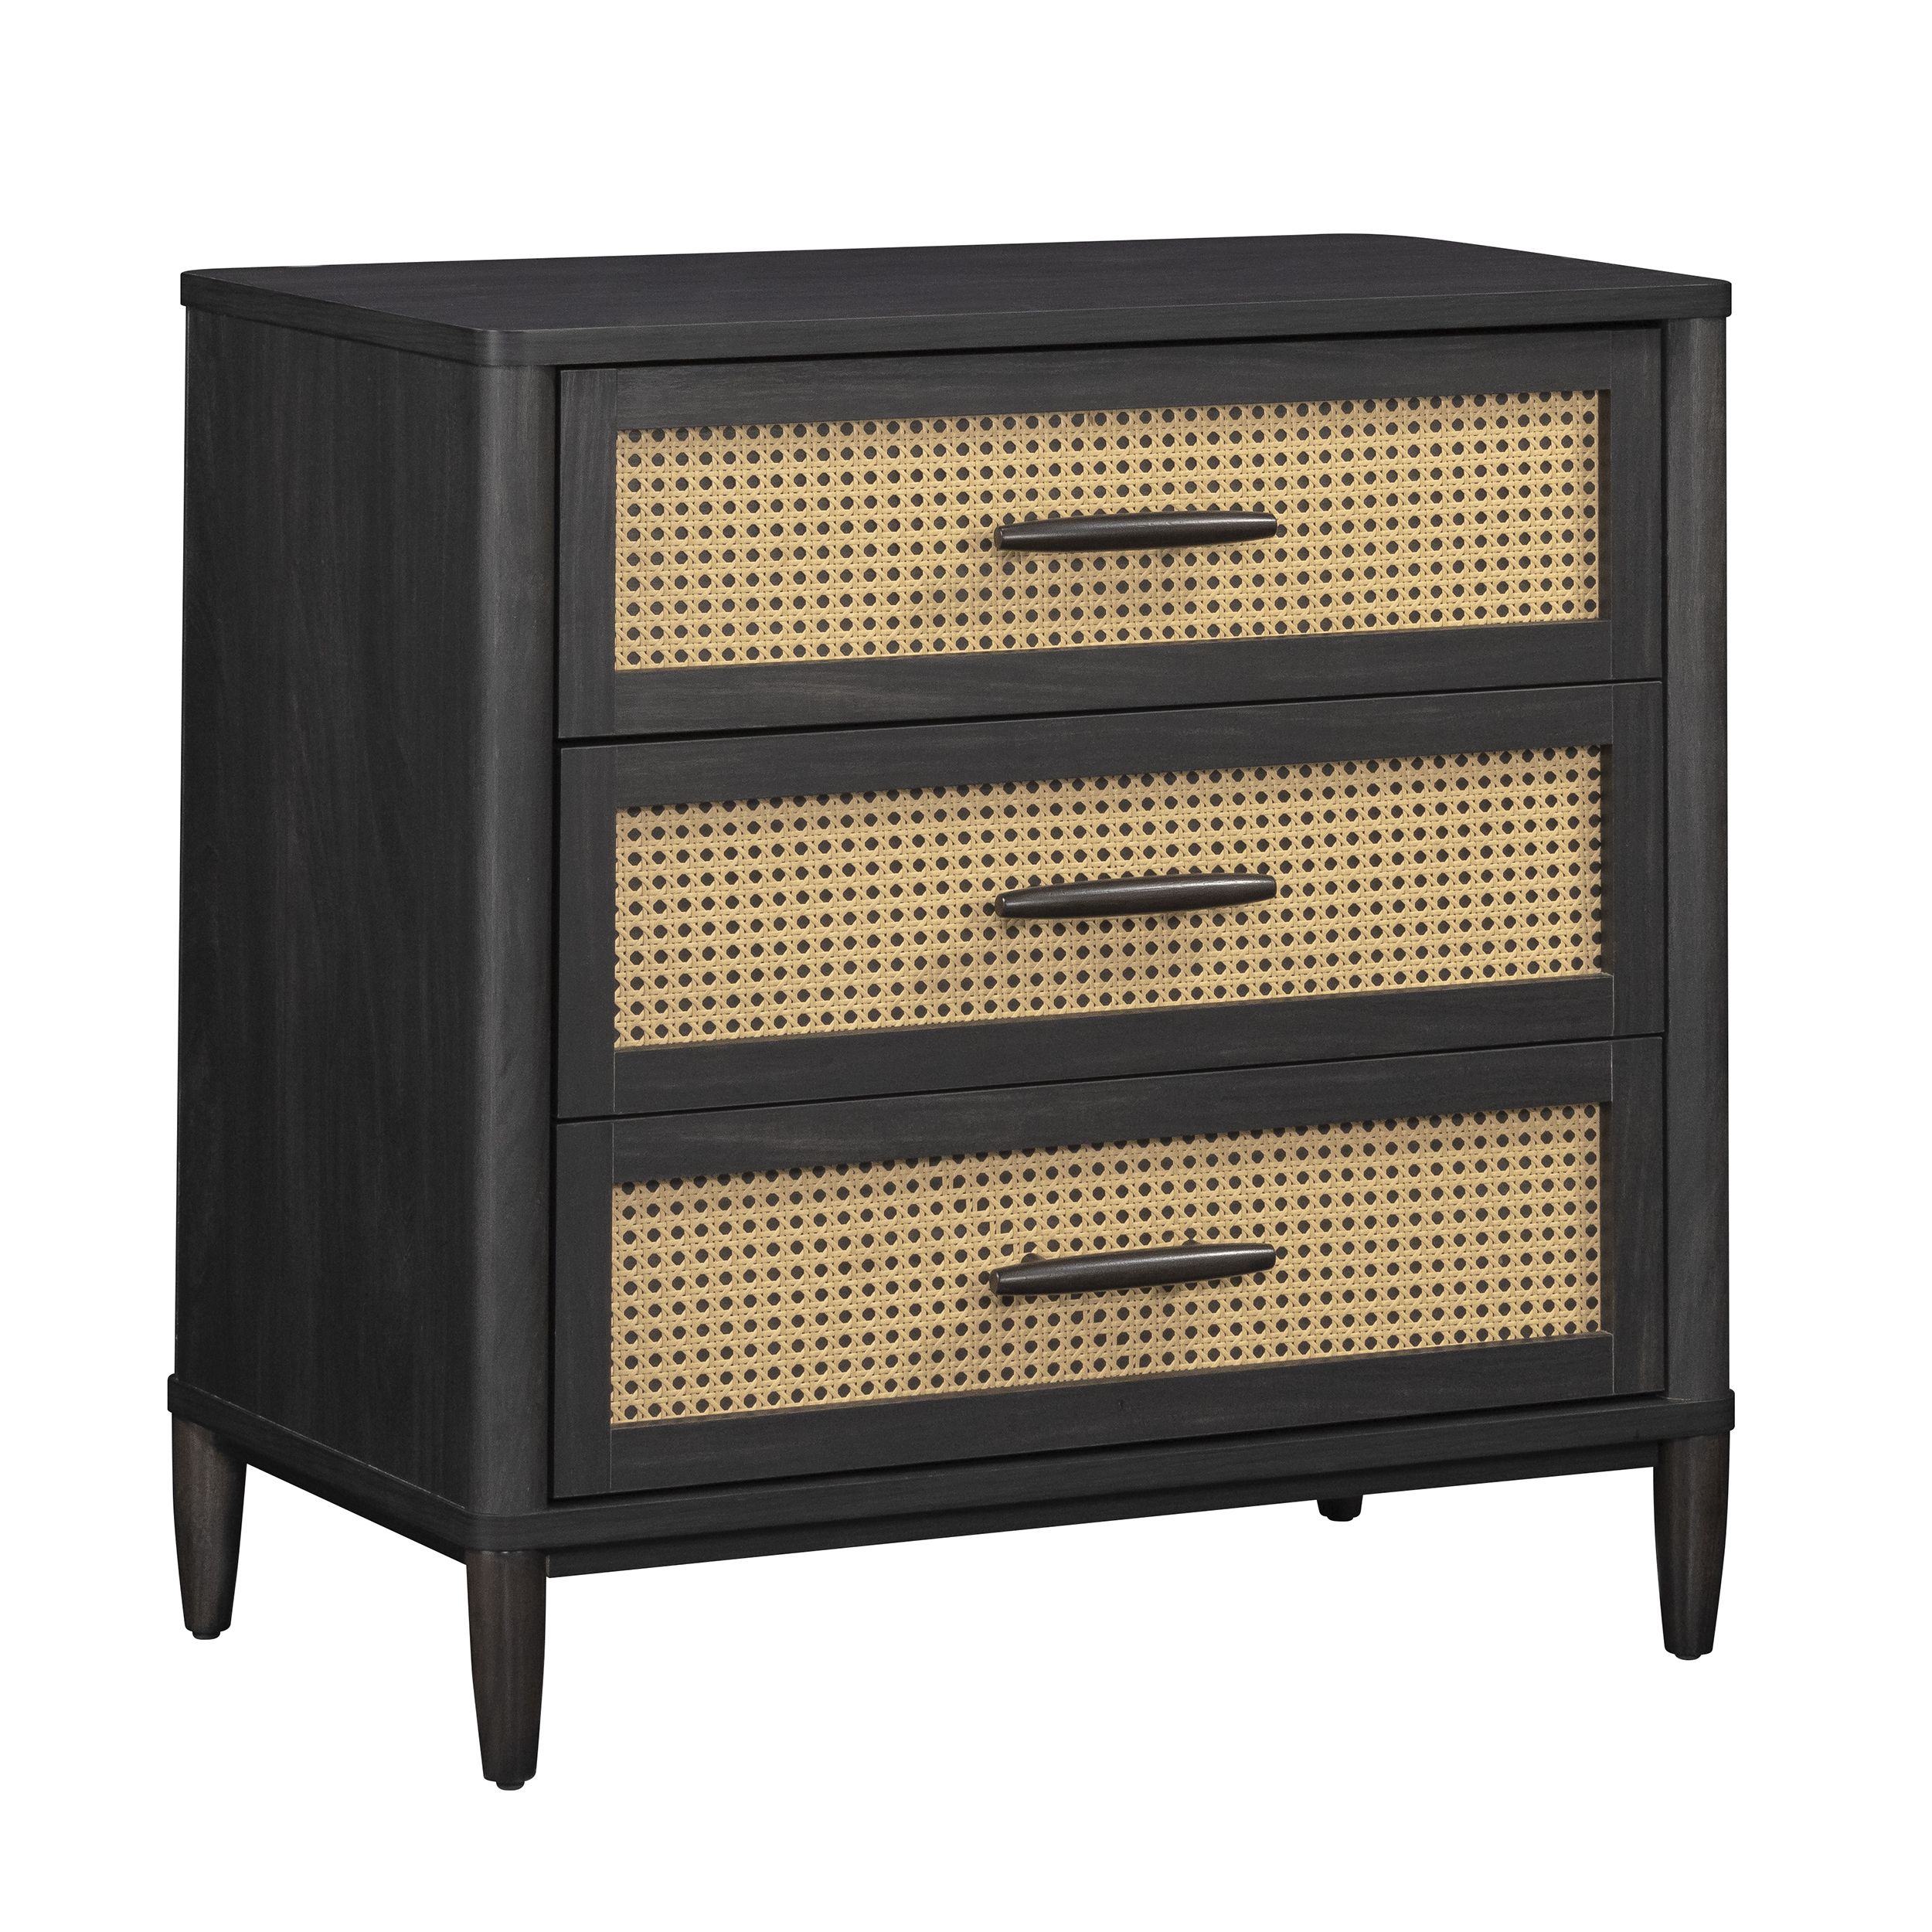 Better Homes & Gardens Springwood Caning 3-Drawer Nightstand, Charcoal finish | Walmart (US)